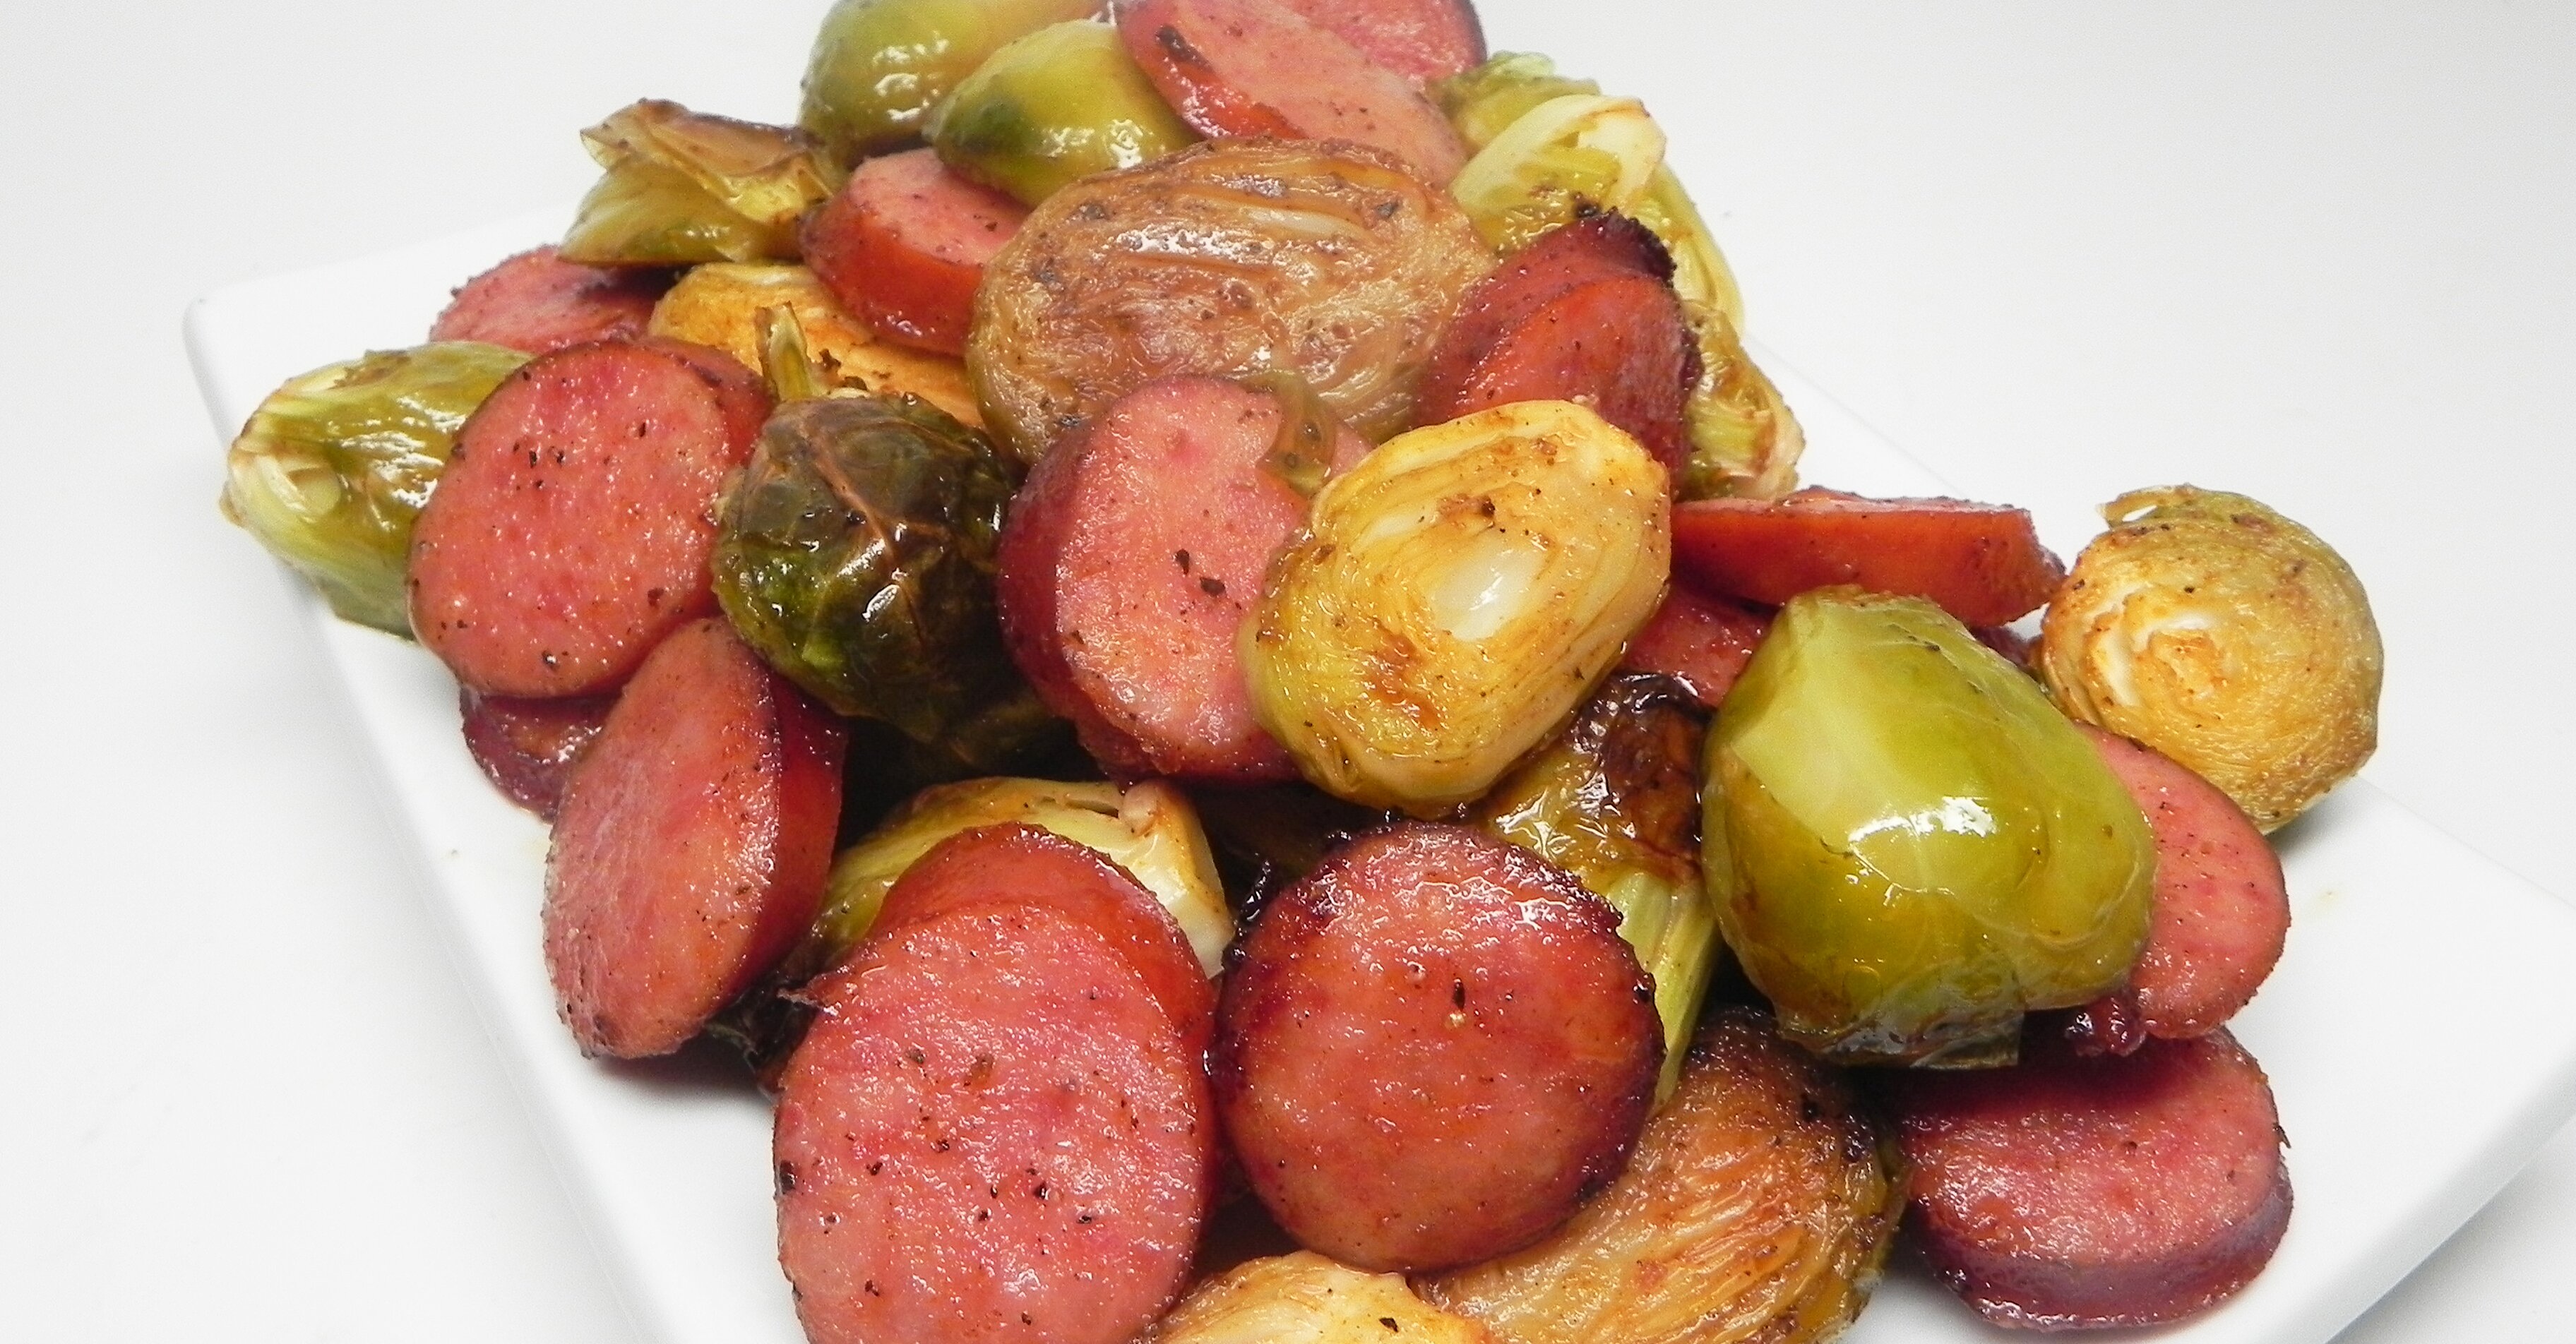 Roasted Brussels Sprouts And Kielbasa Recipe Allrecipes,Steaming Broccoli And Cauliflower